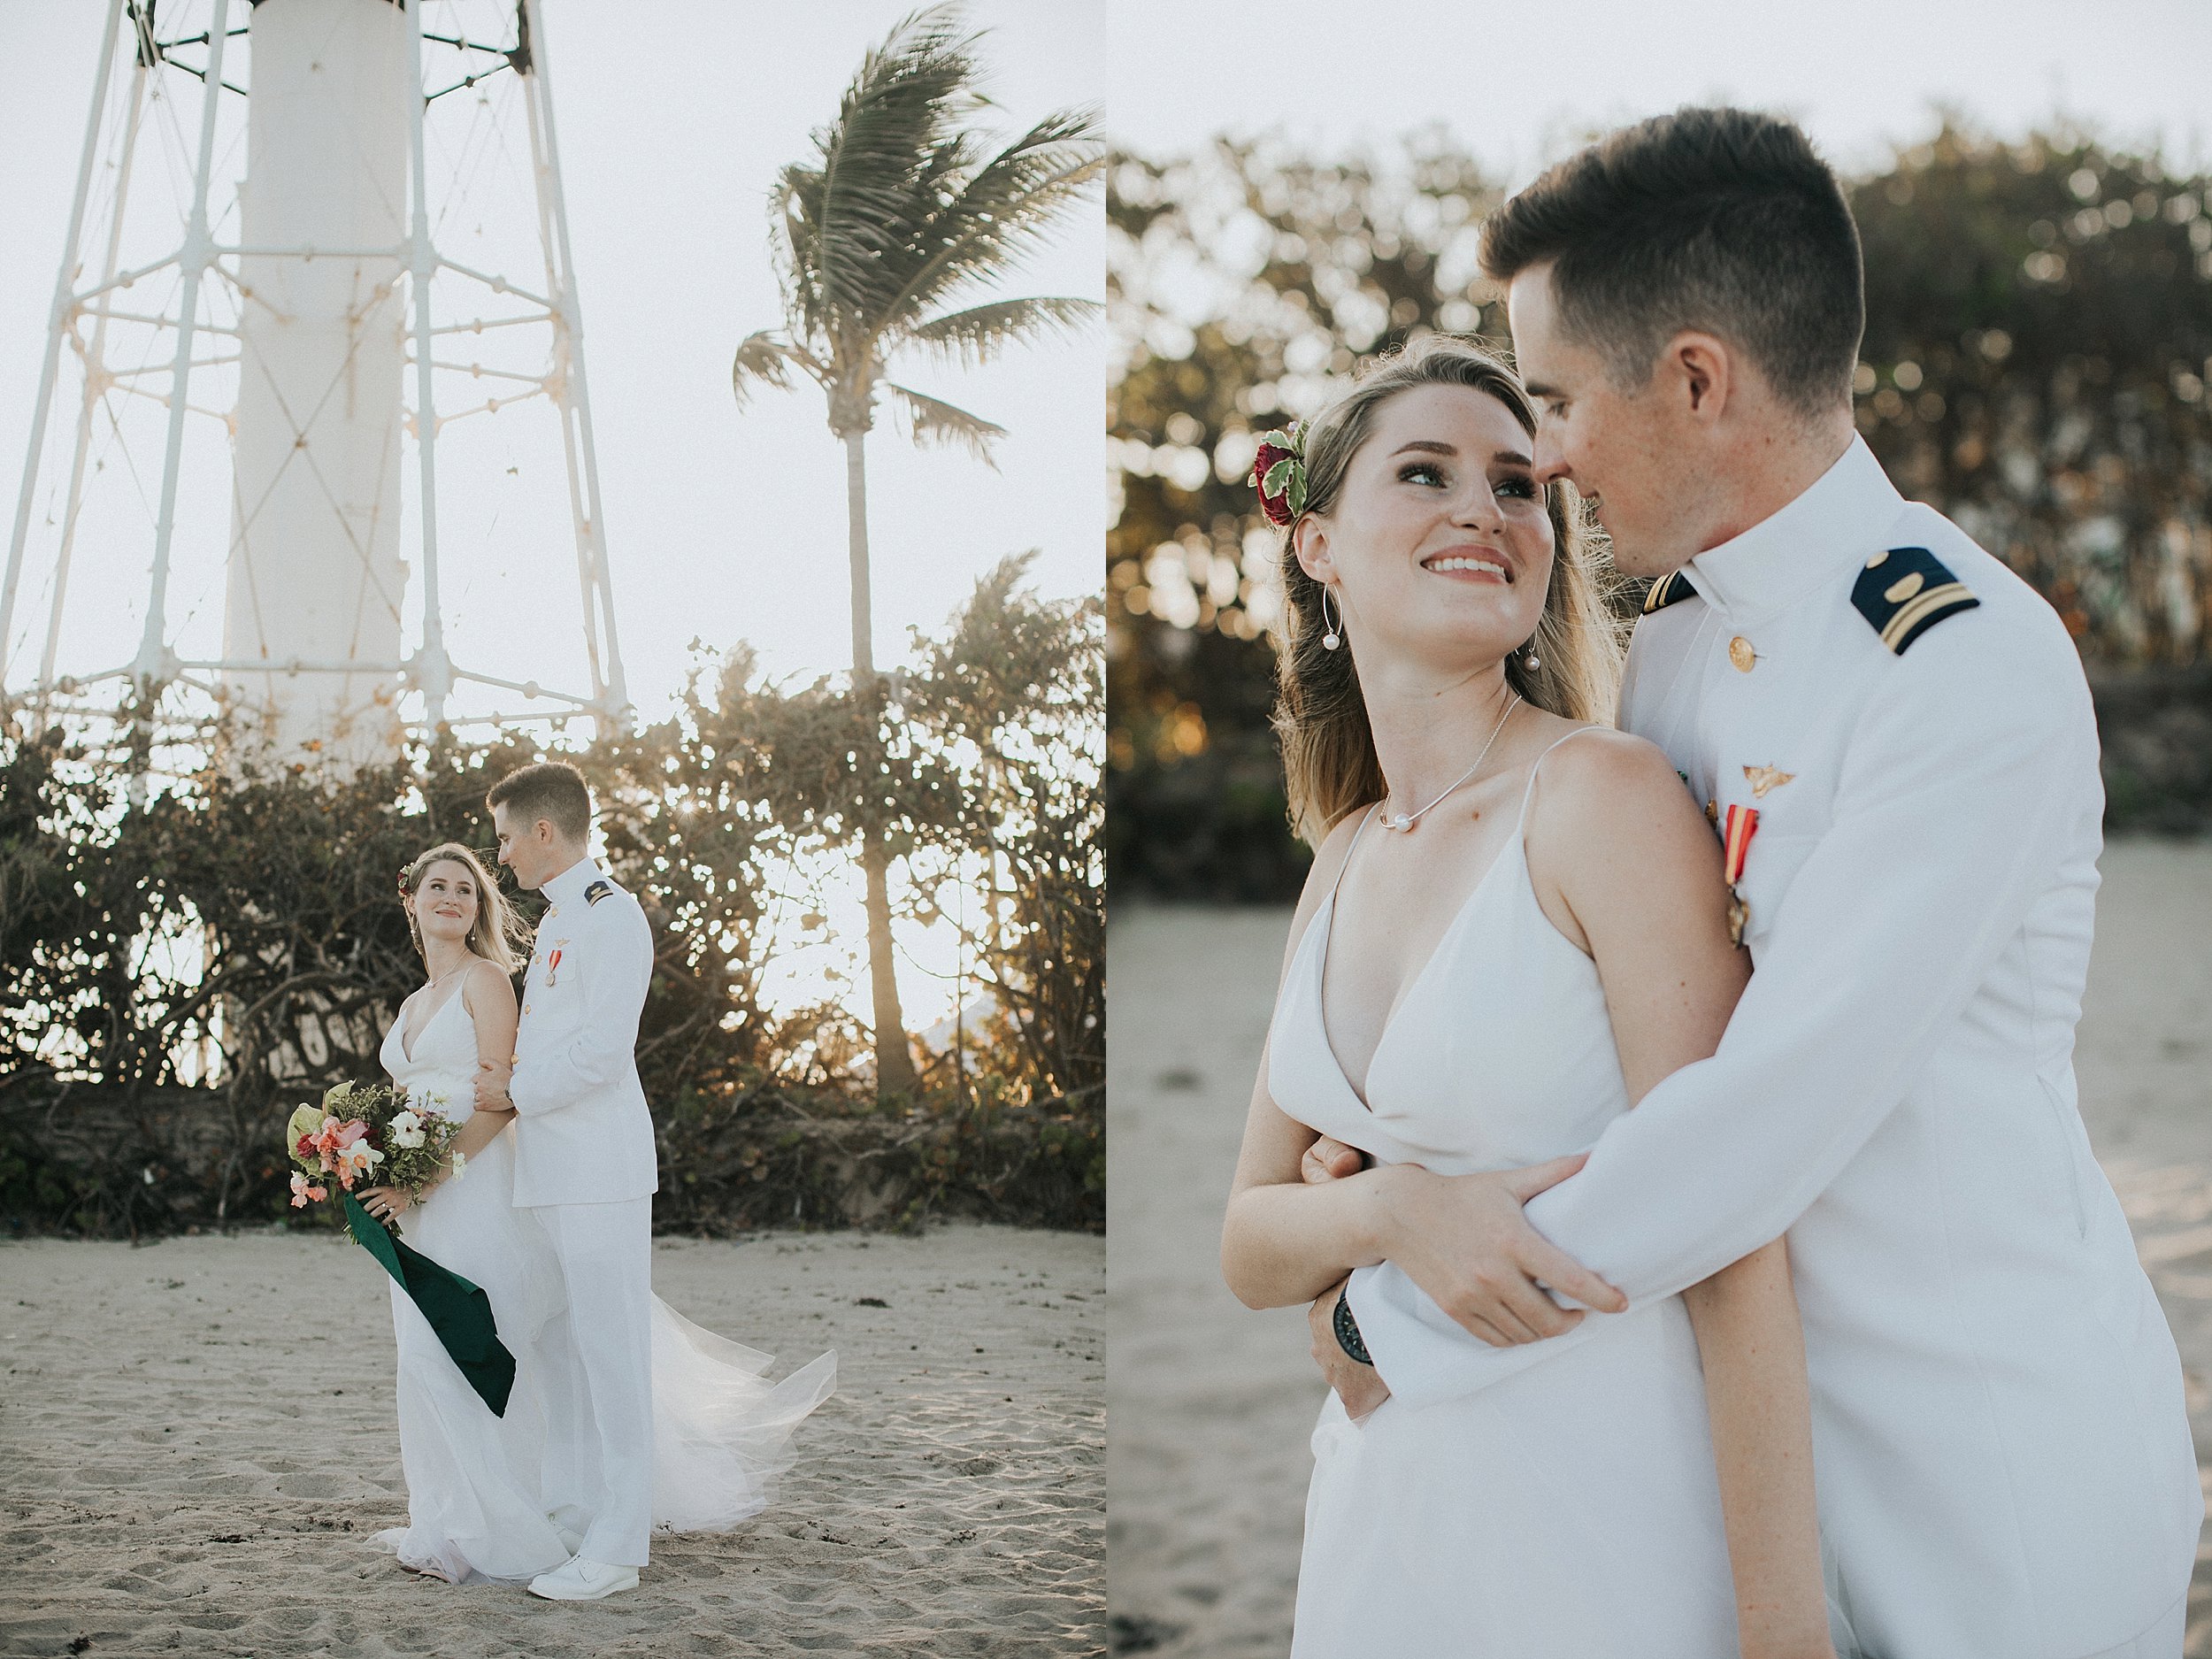 bride and groom portraits on the beach